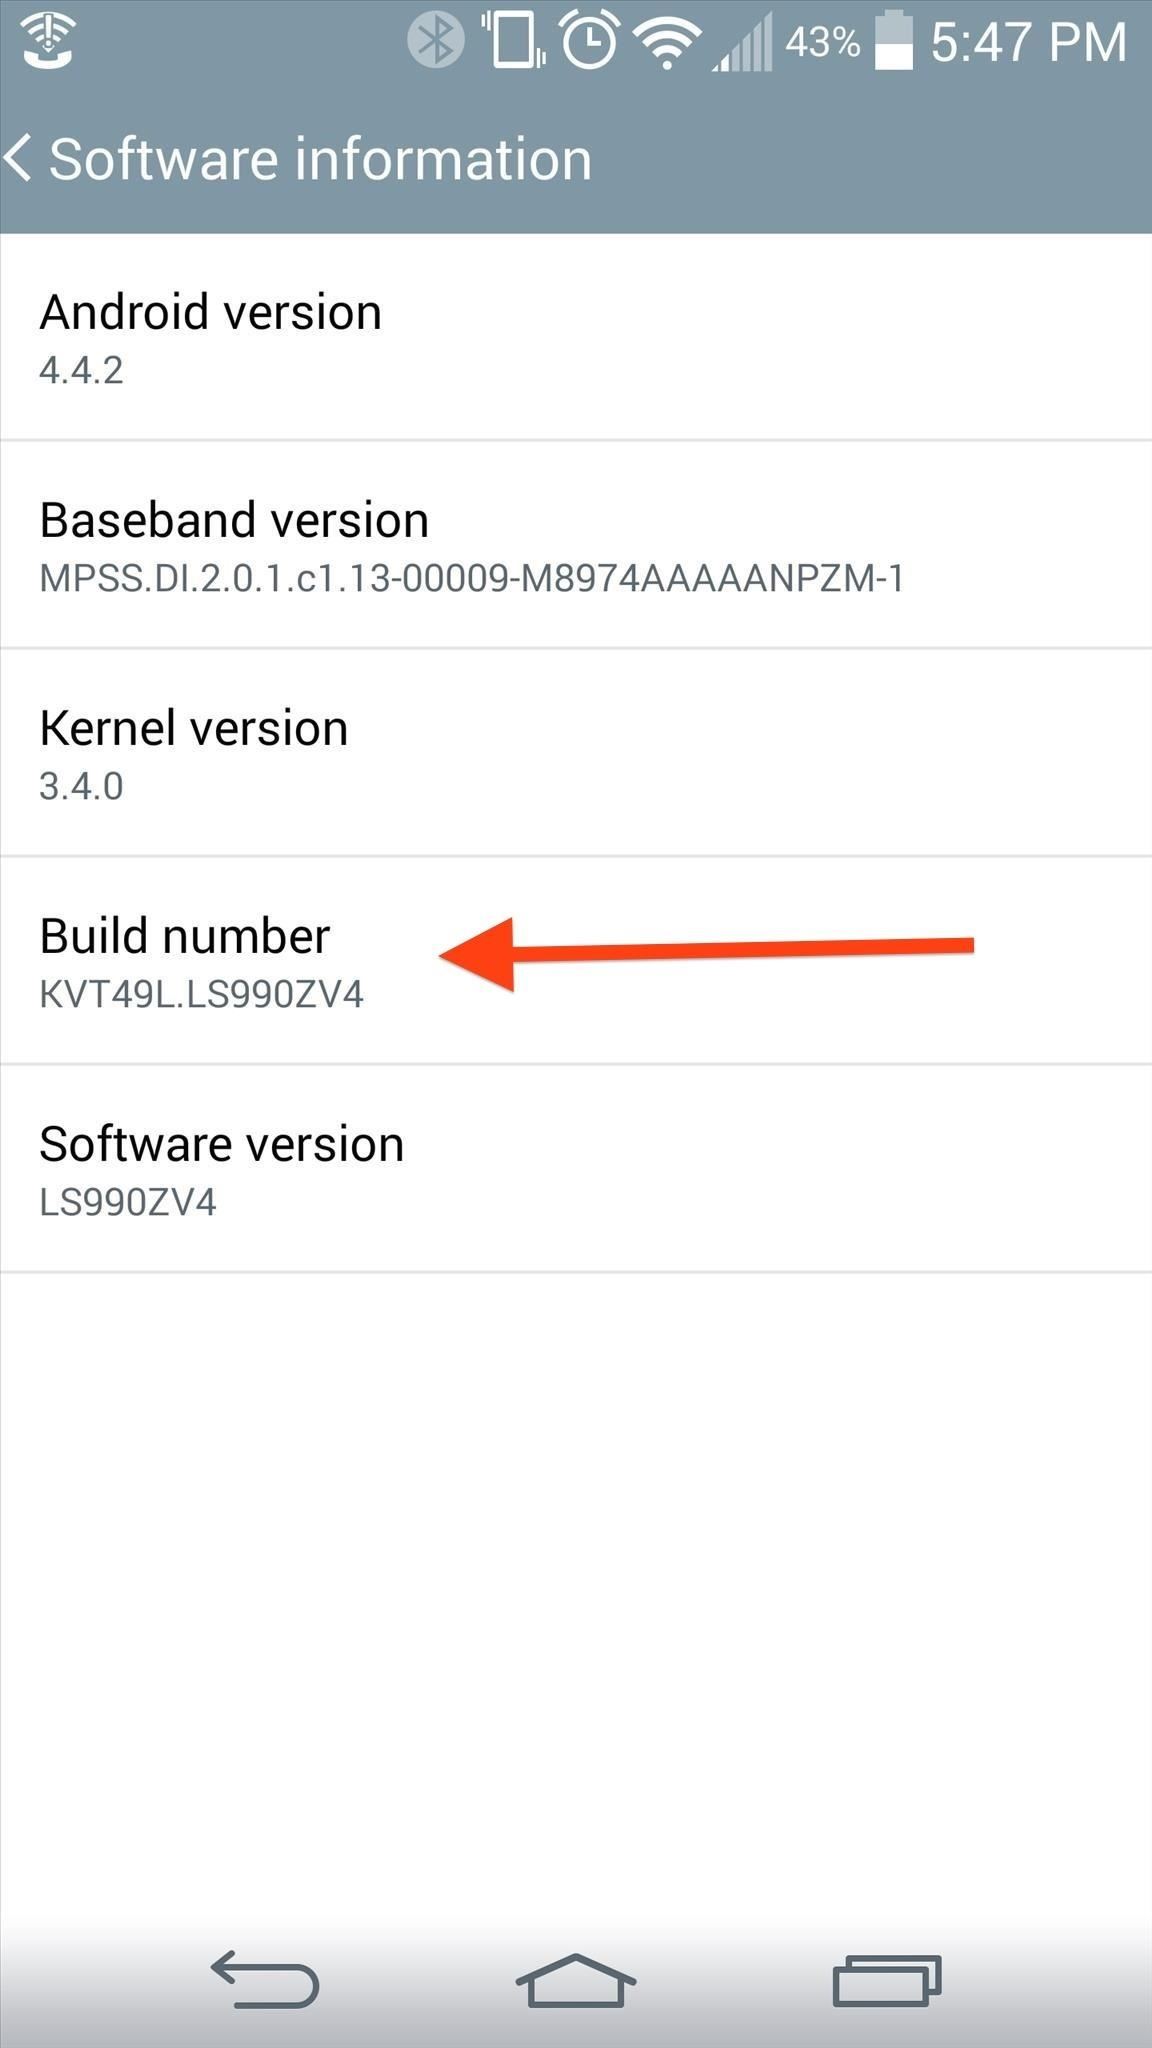 How to Enable the Hidden Developer Options & USB Debugging on the LG G3